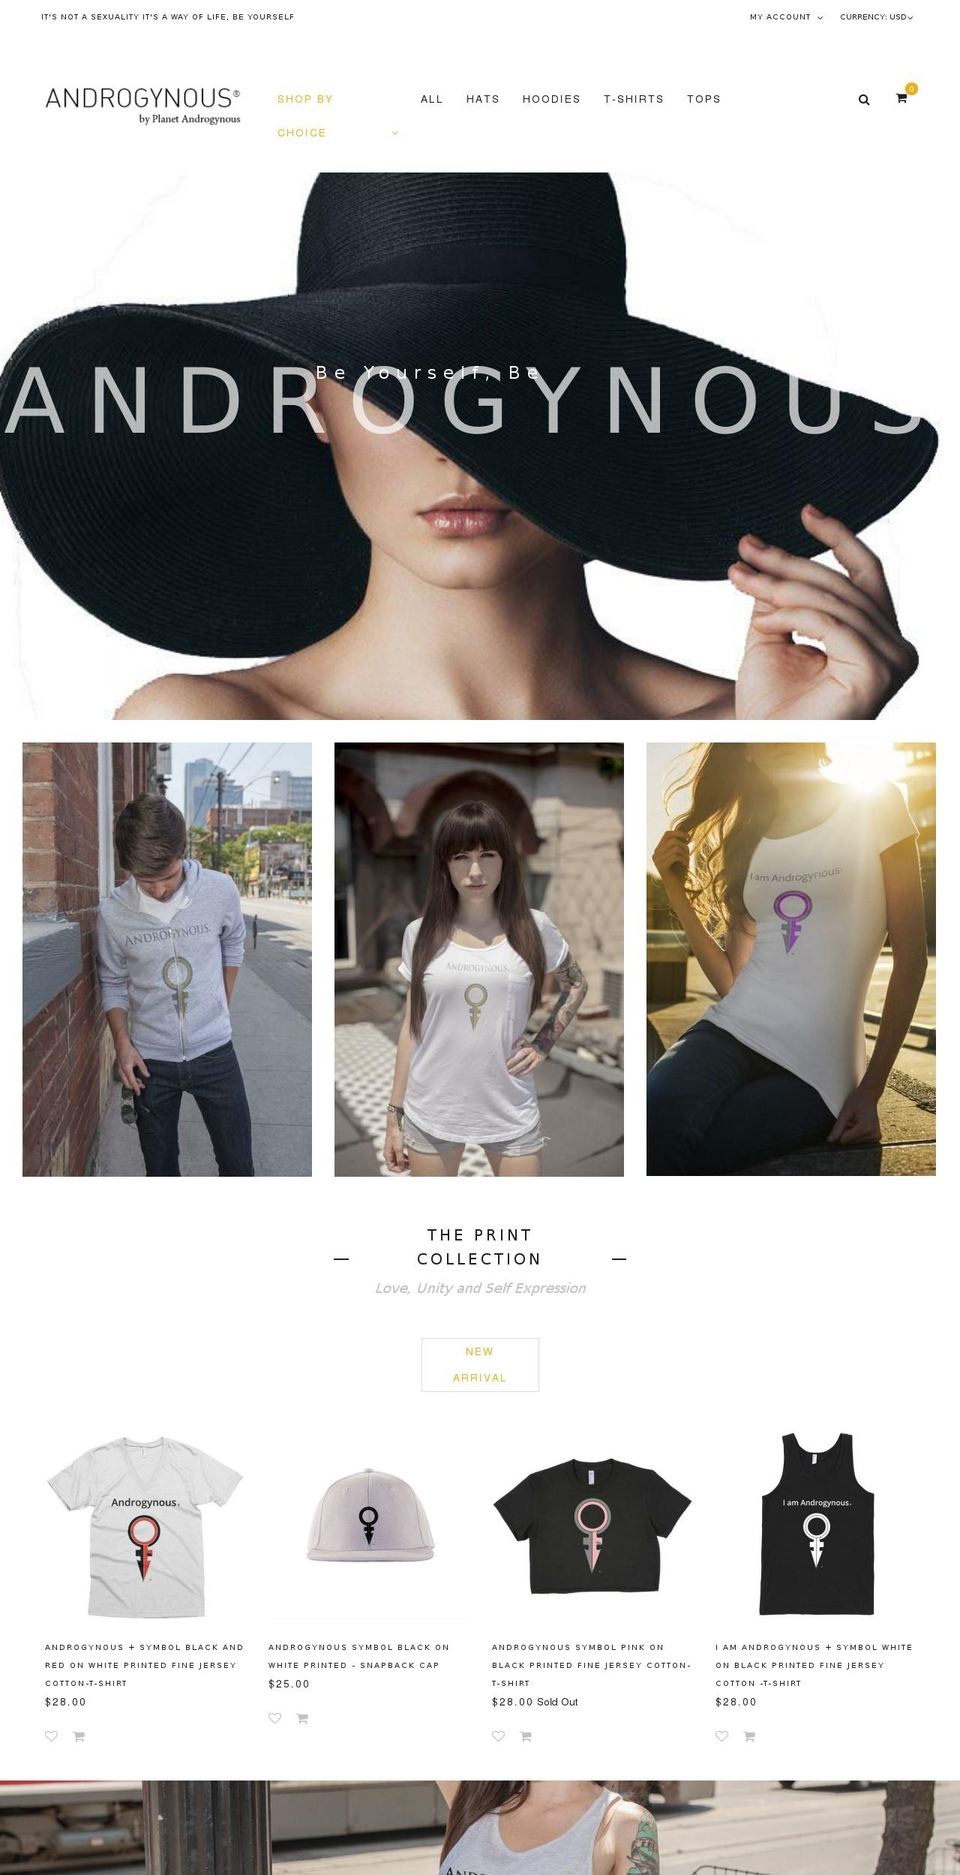 Androgynous Apparel Shopify theme site example androgynousclothes.com